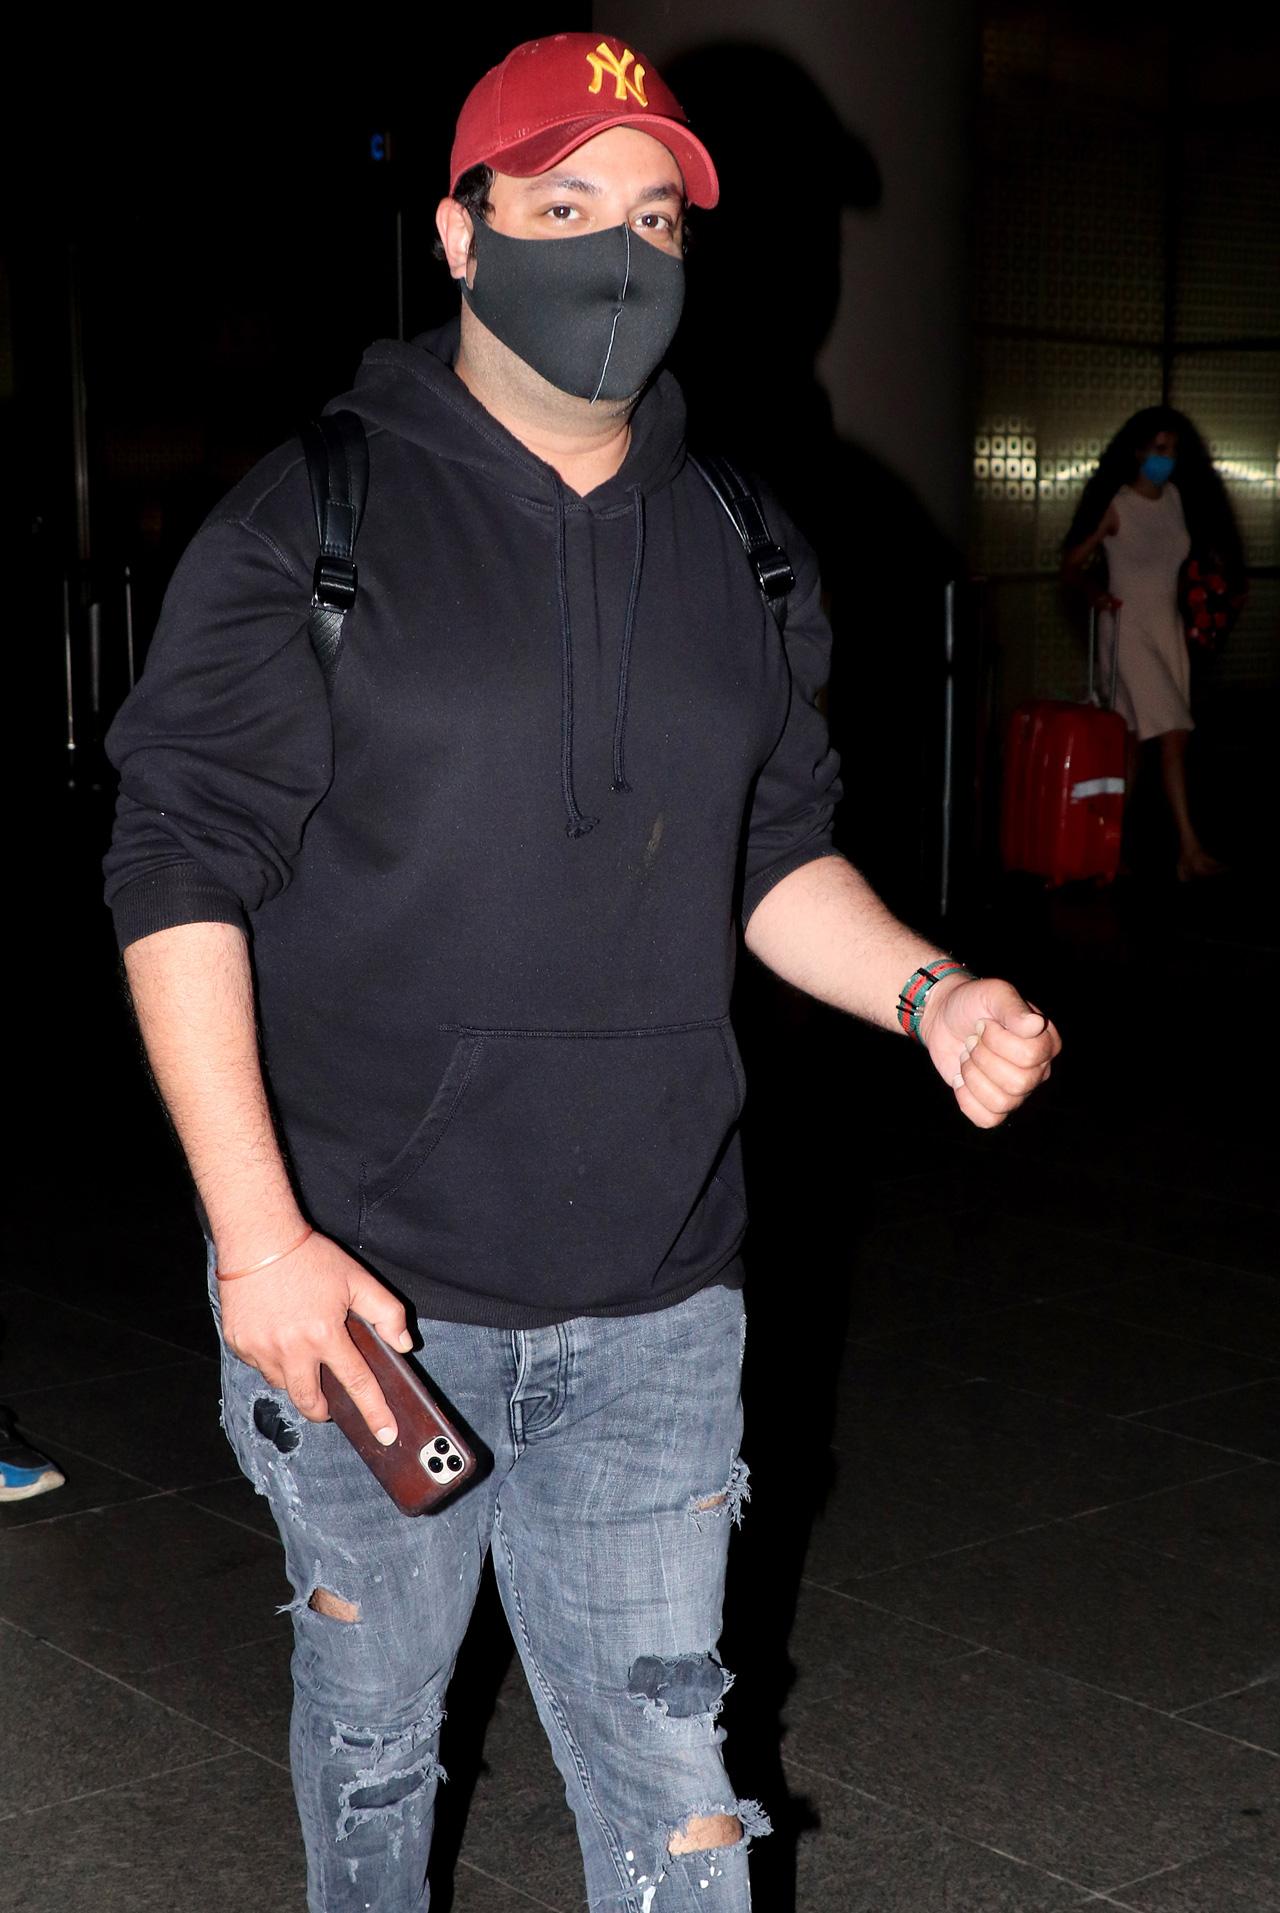 Varun Sharma, who was last seen in Roohi along with Janhvi Kapoor and Rajkummar Rao, was also spotted at Mumbai airport.